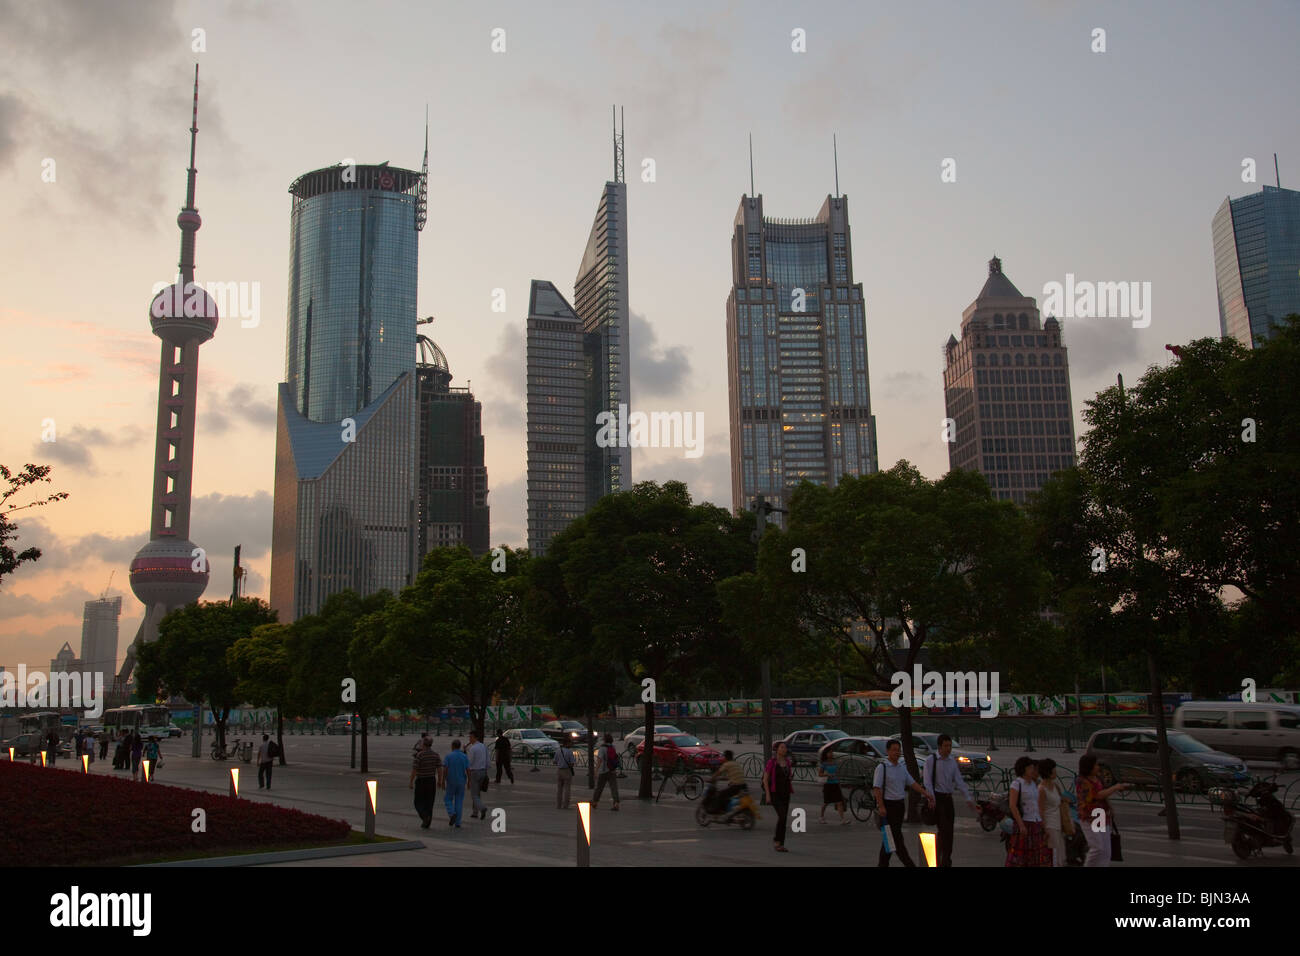 Pudong, Lujiazui financial district with Oriental Pearl TV Tower on left in Shanghai, China, Stock Photo